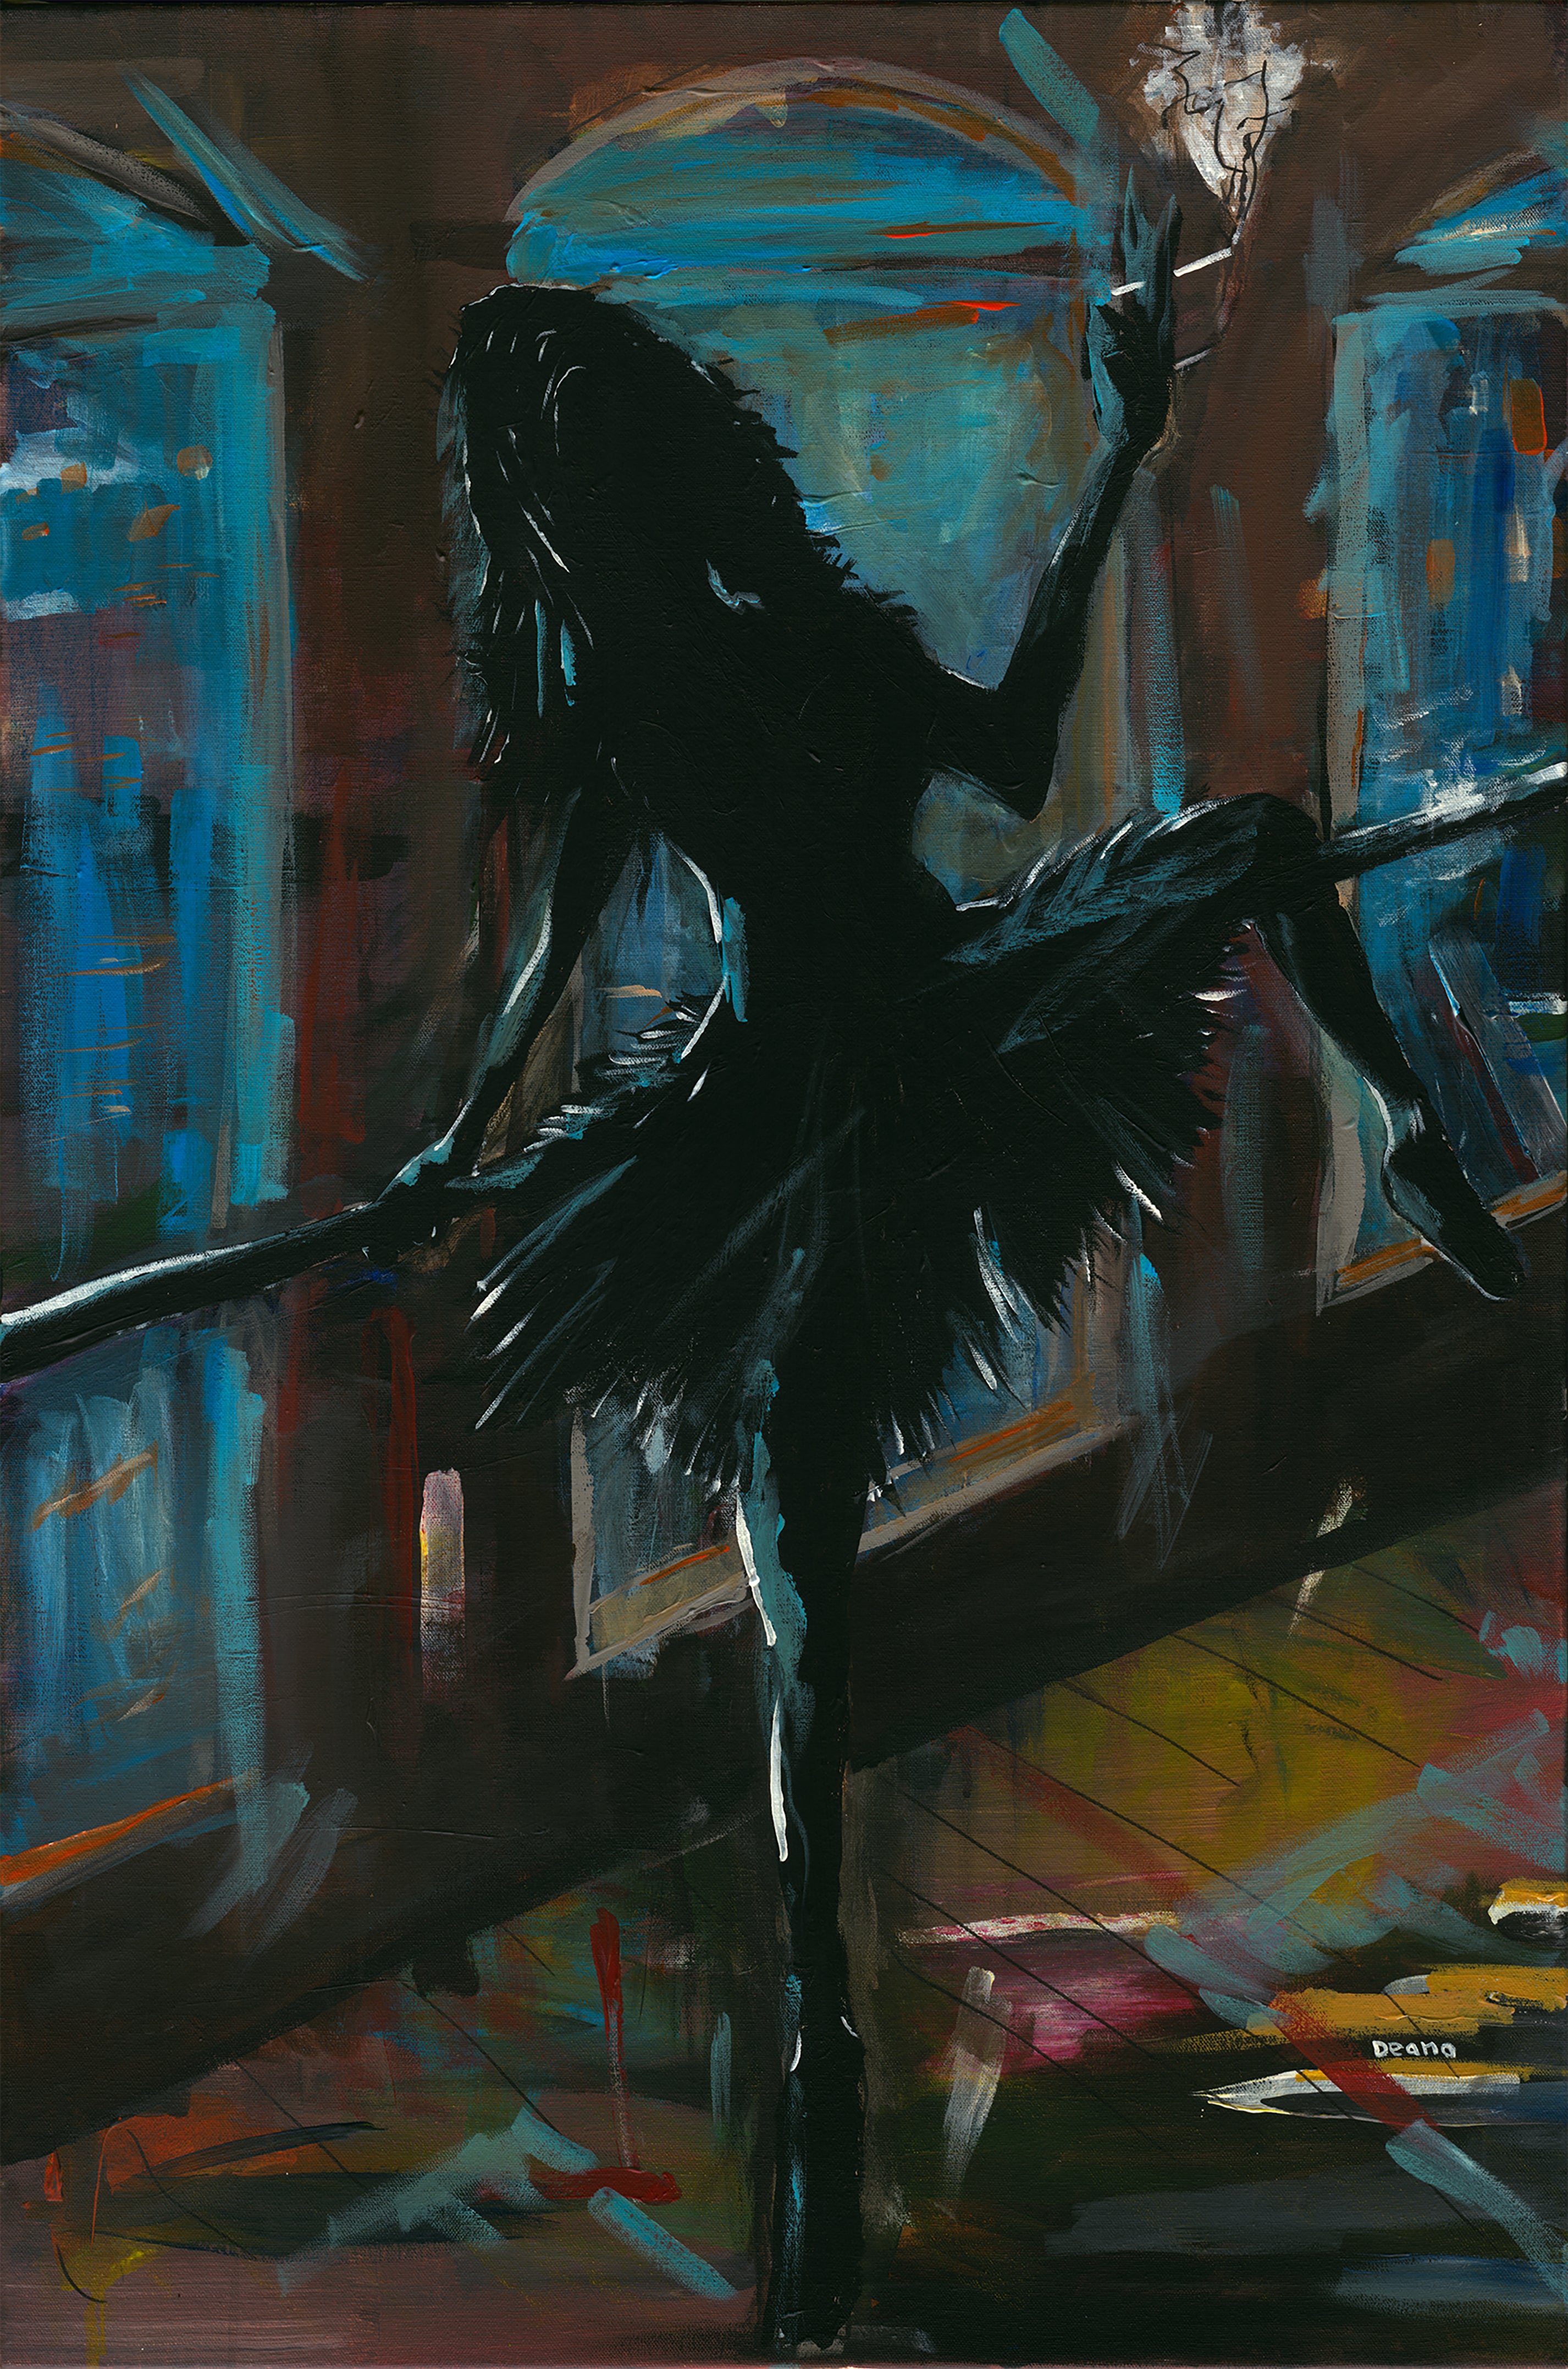 A meticulous blend of acrylic and pastel crafts the image of a ballerina set against a dark backdrop. Dressed in a black tutu and holding a cigarette, her silhouette emerges from the shadows, exuding an aura of mystery and grace. Crafted by Deano Hewitts between 2016-2018.